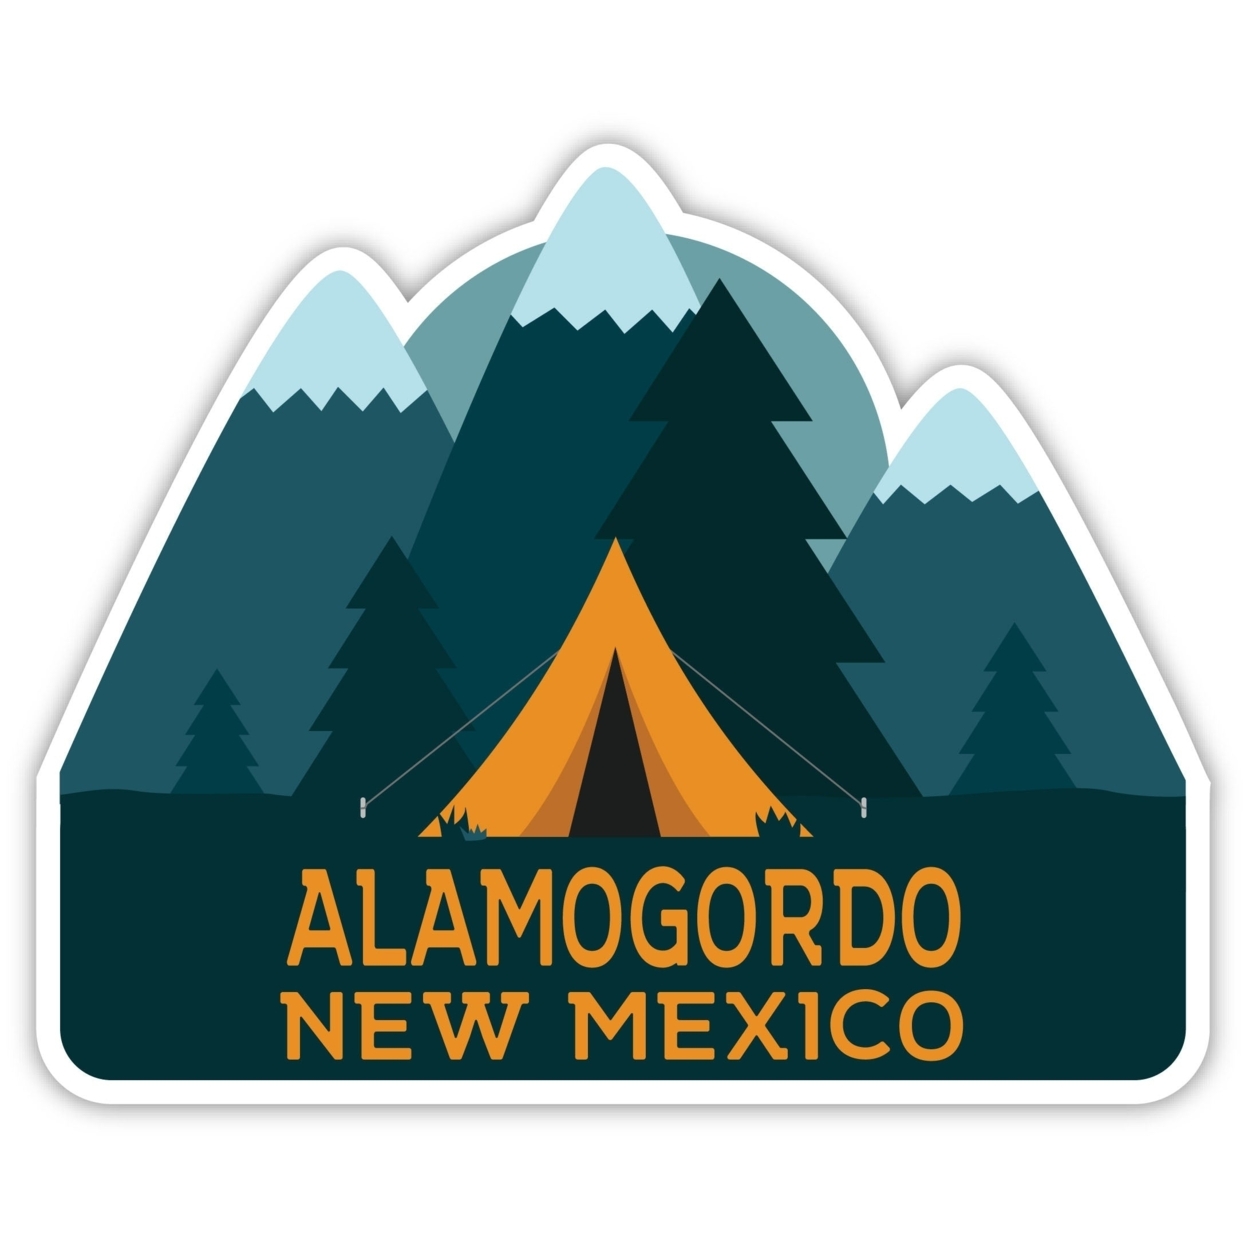 Alamogordo New Mexico Souvenir Decorative Stickers (Choose Theme And Size) - 4-Pack, 6-Inch, Camp Life